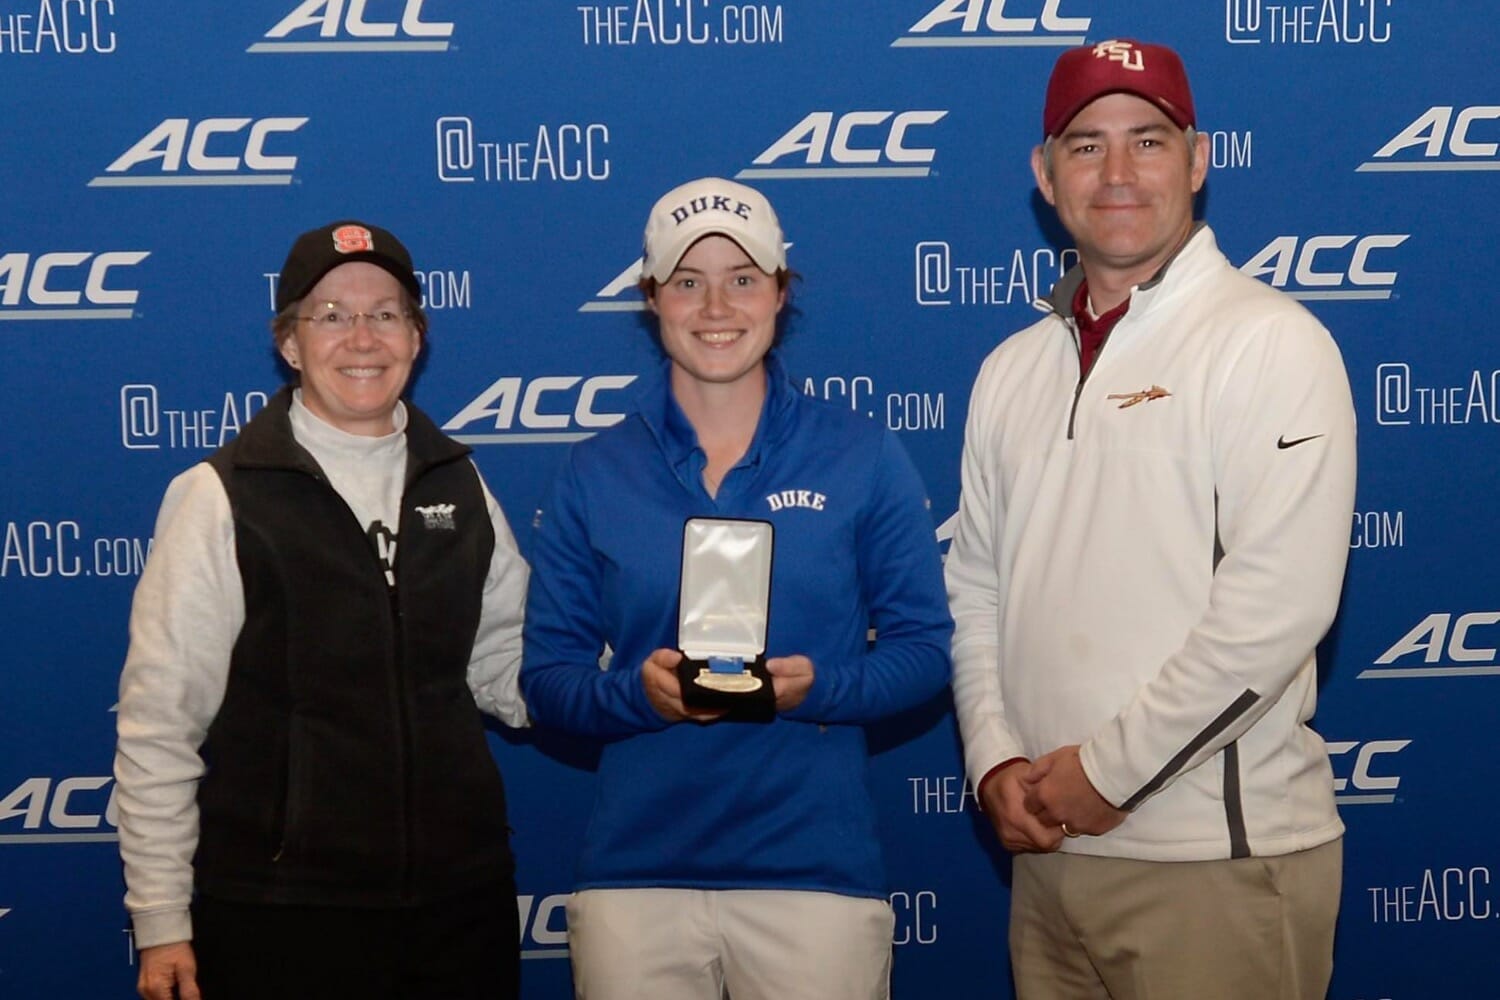 Maguire is a triple ACC Champion after playoff victory